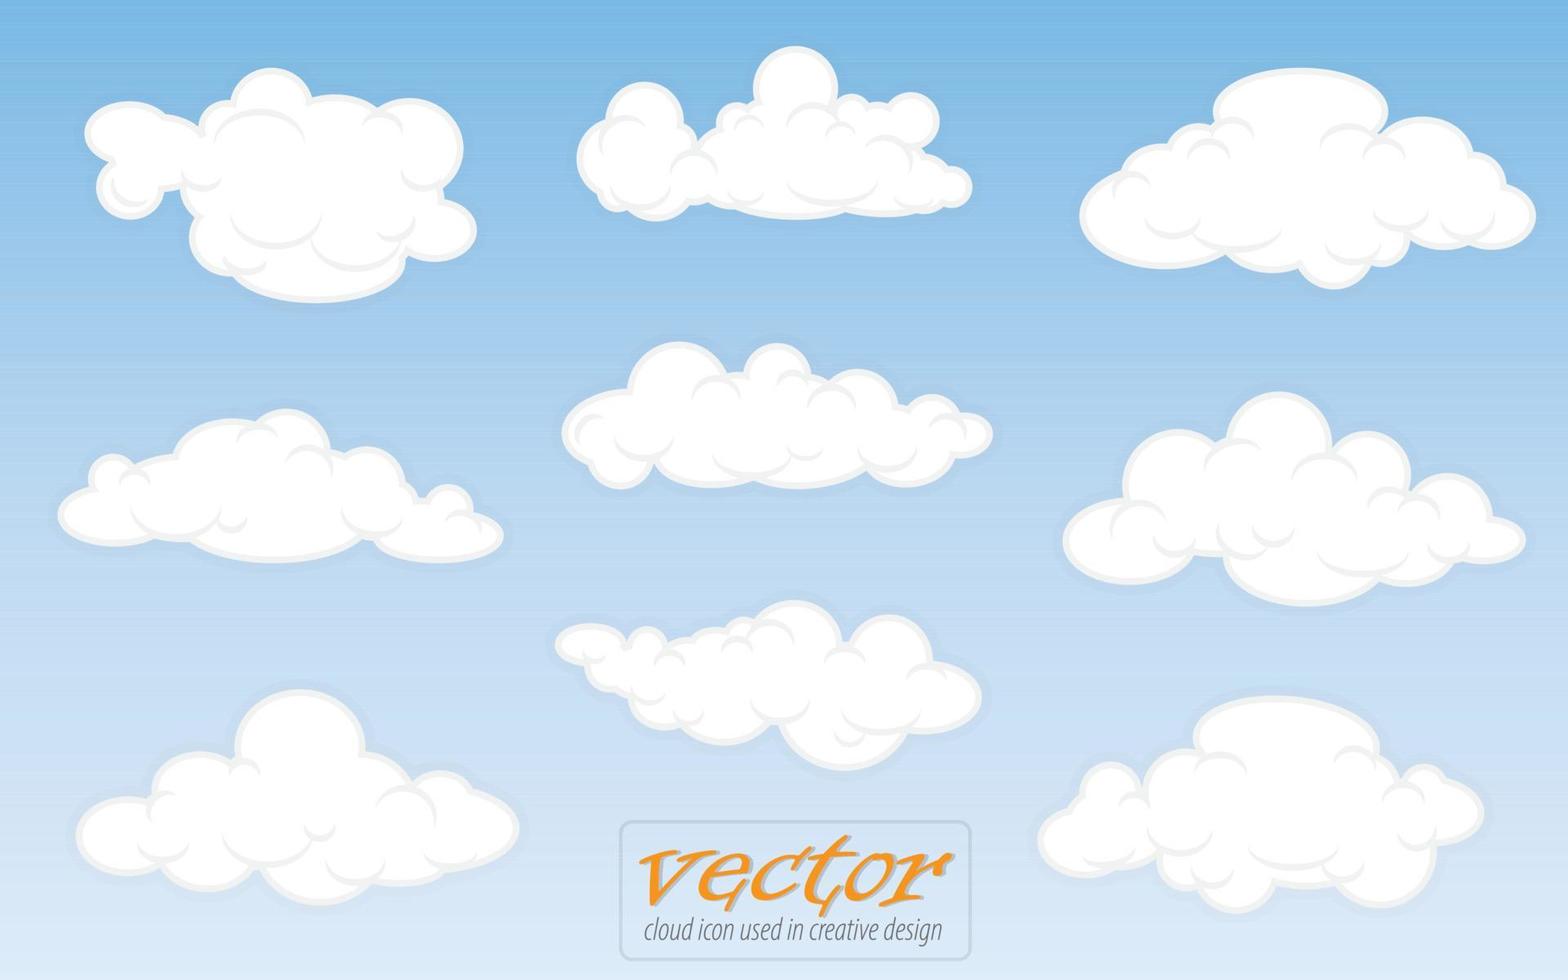 vector cloud icon used in creative design